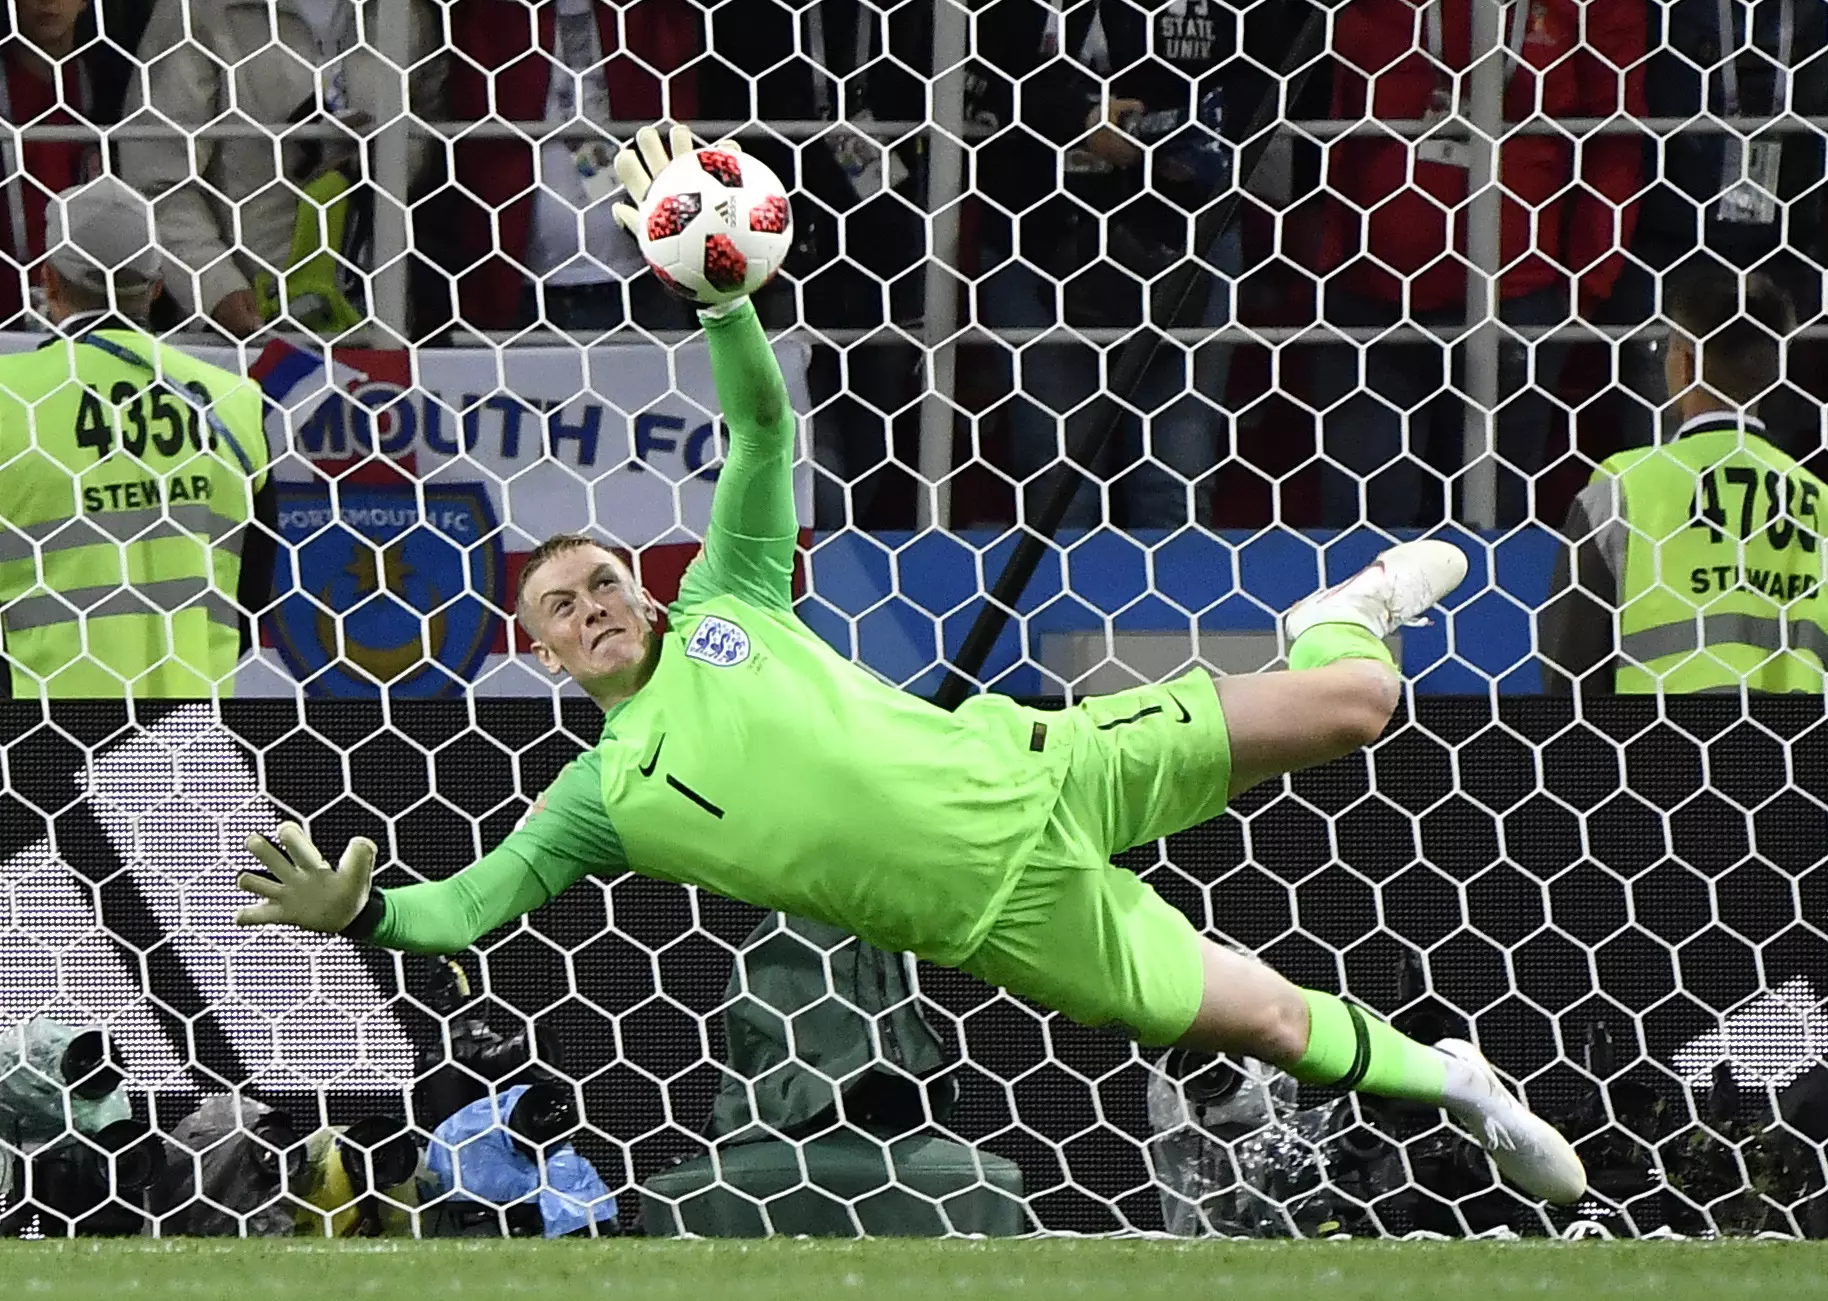 Jordan Pickford saving a penalty against Colombia in Moscow (Image